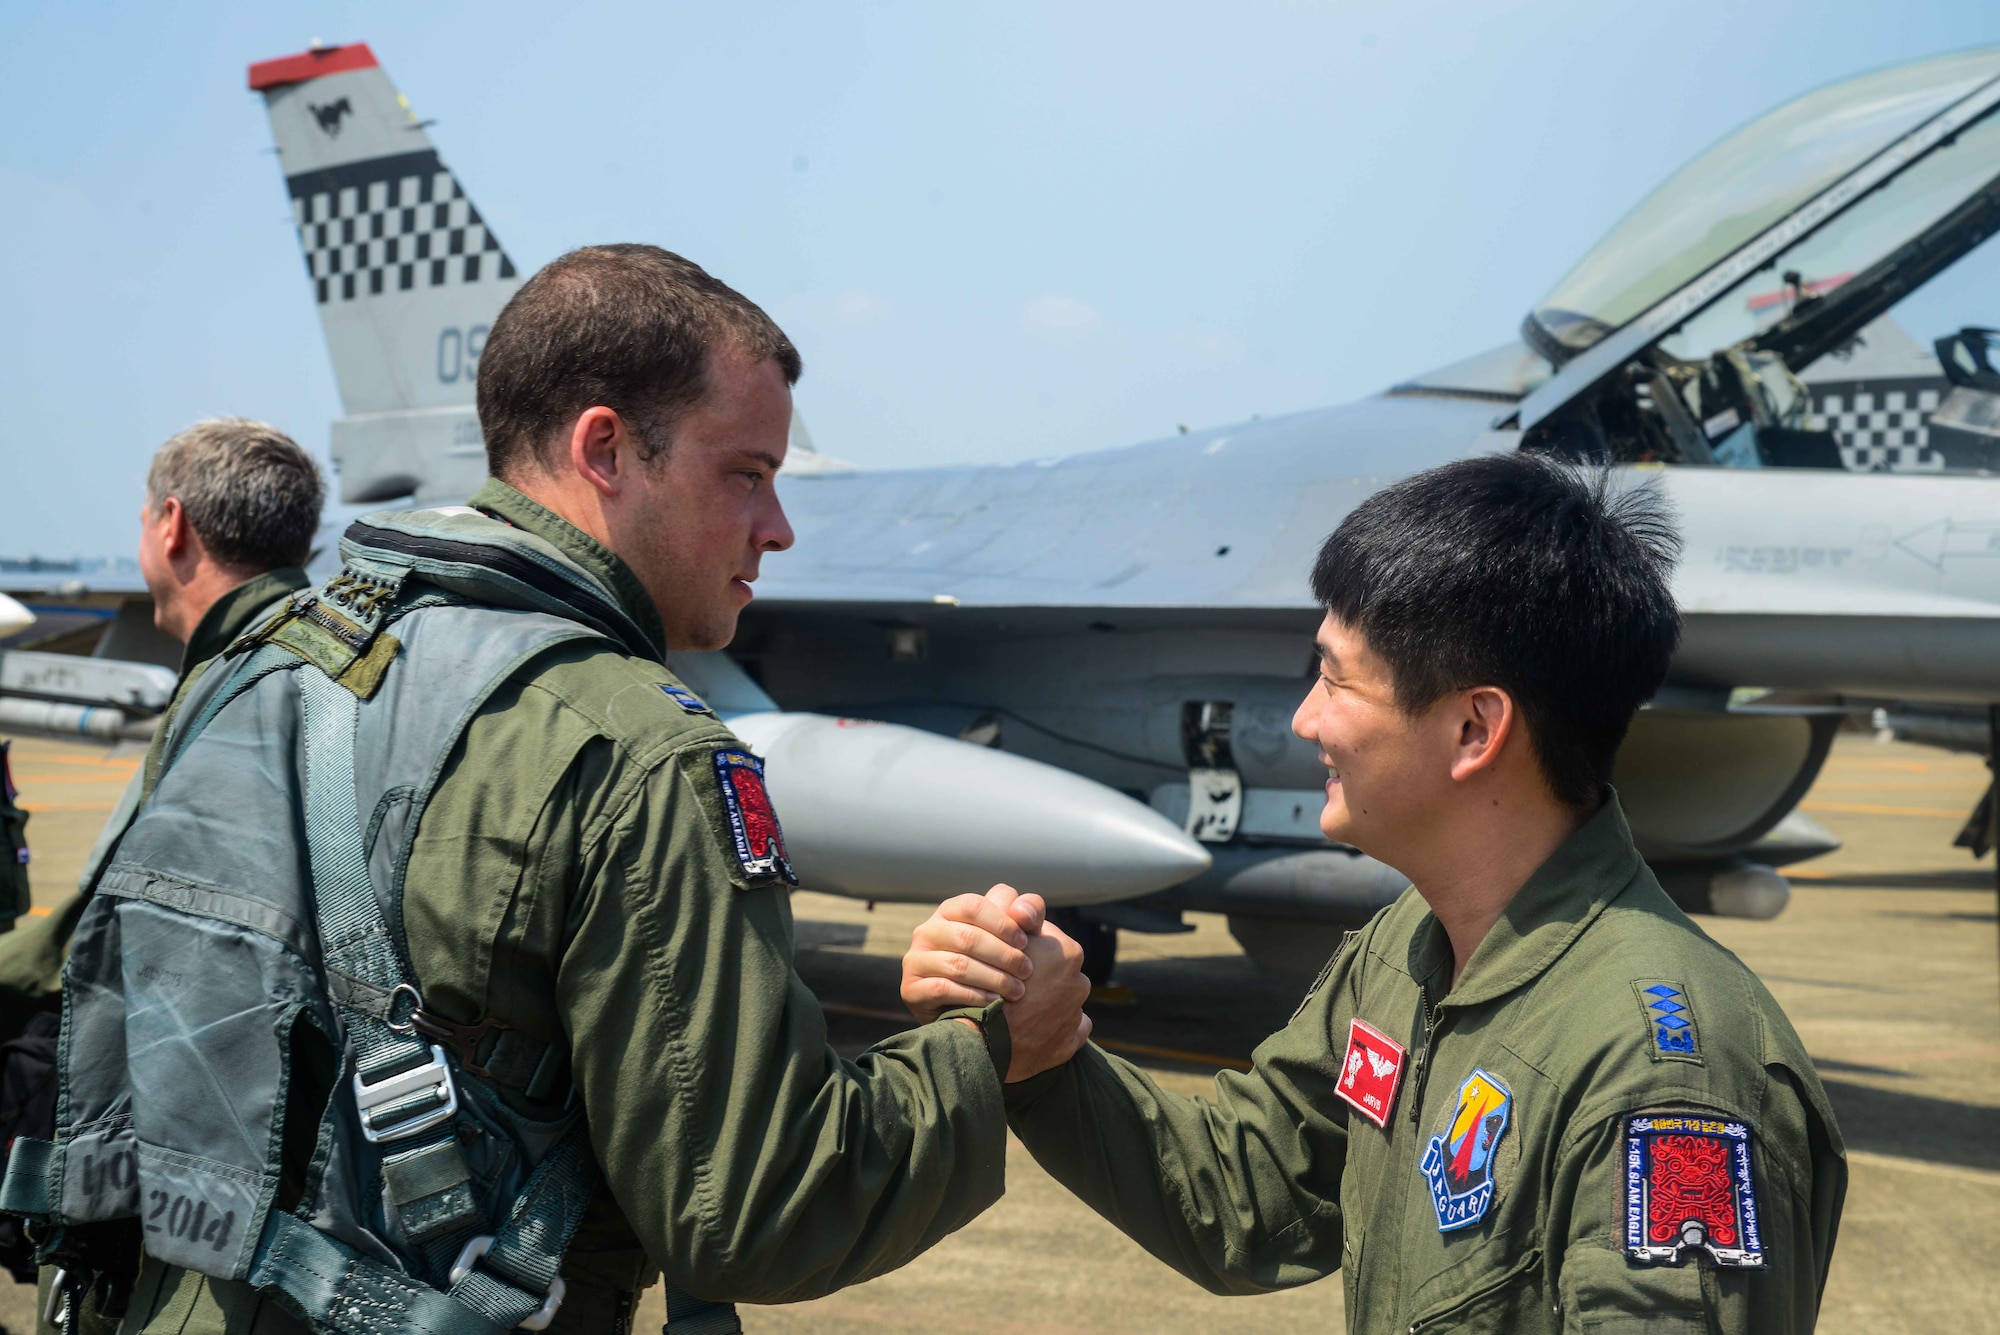 Capt. Ryan Pebler, 36th Fighter Squadron F-16 Fighting Falcon pilot, shakes hands with Republic of Korea air force Capt. Chon, Hun Min, 11th Fighter Wing F-15K Slam Eagle pilot, before takeoff during Buddy Wing 16-7 at Daegu Air Base, ROK, Aug. 12, 2016. In October, both Pebler and Chon will be participating in RED FLAG-Alaska, a Pacific Air Forces exercise that provides joint offensive counter-air, interdiction, close air support and large force employment training in a simulated combat environment. (U.S. Air Force photo by Senior Airman Dillian Bamman)